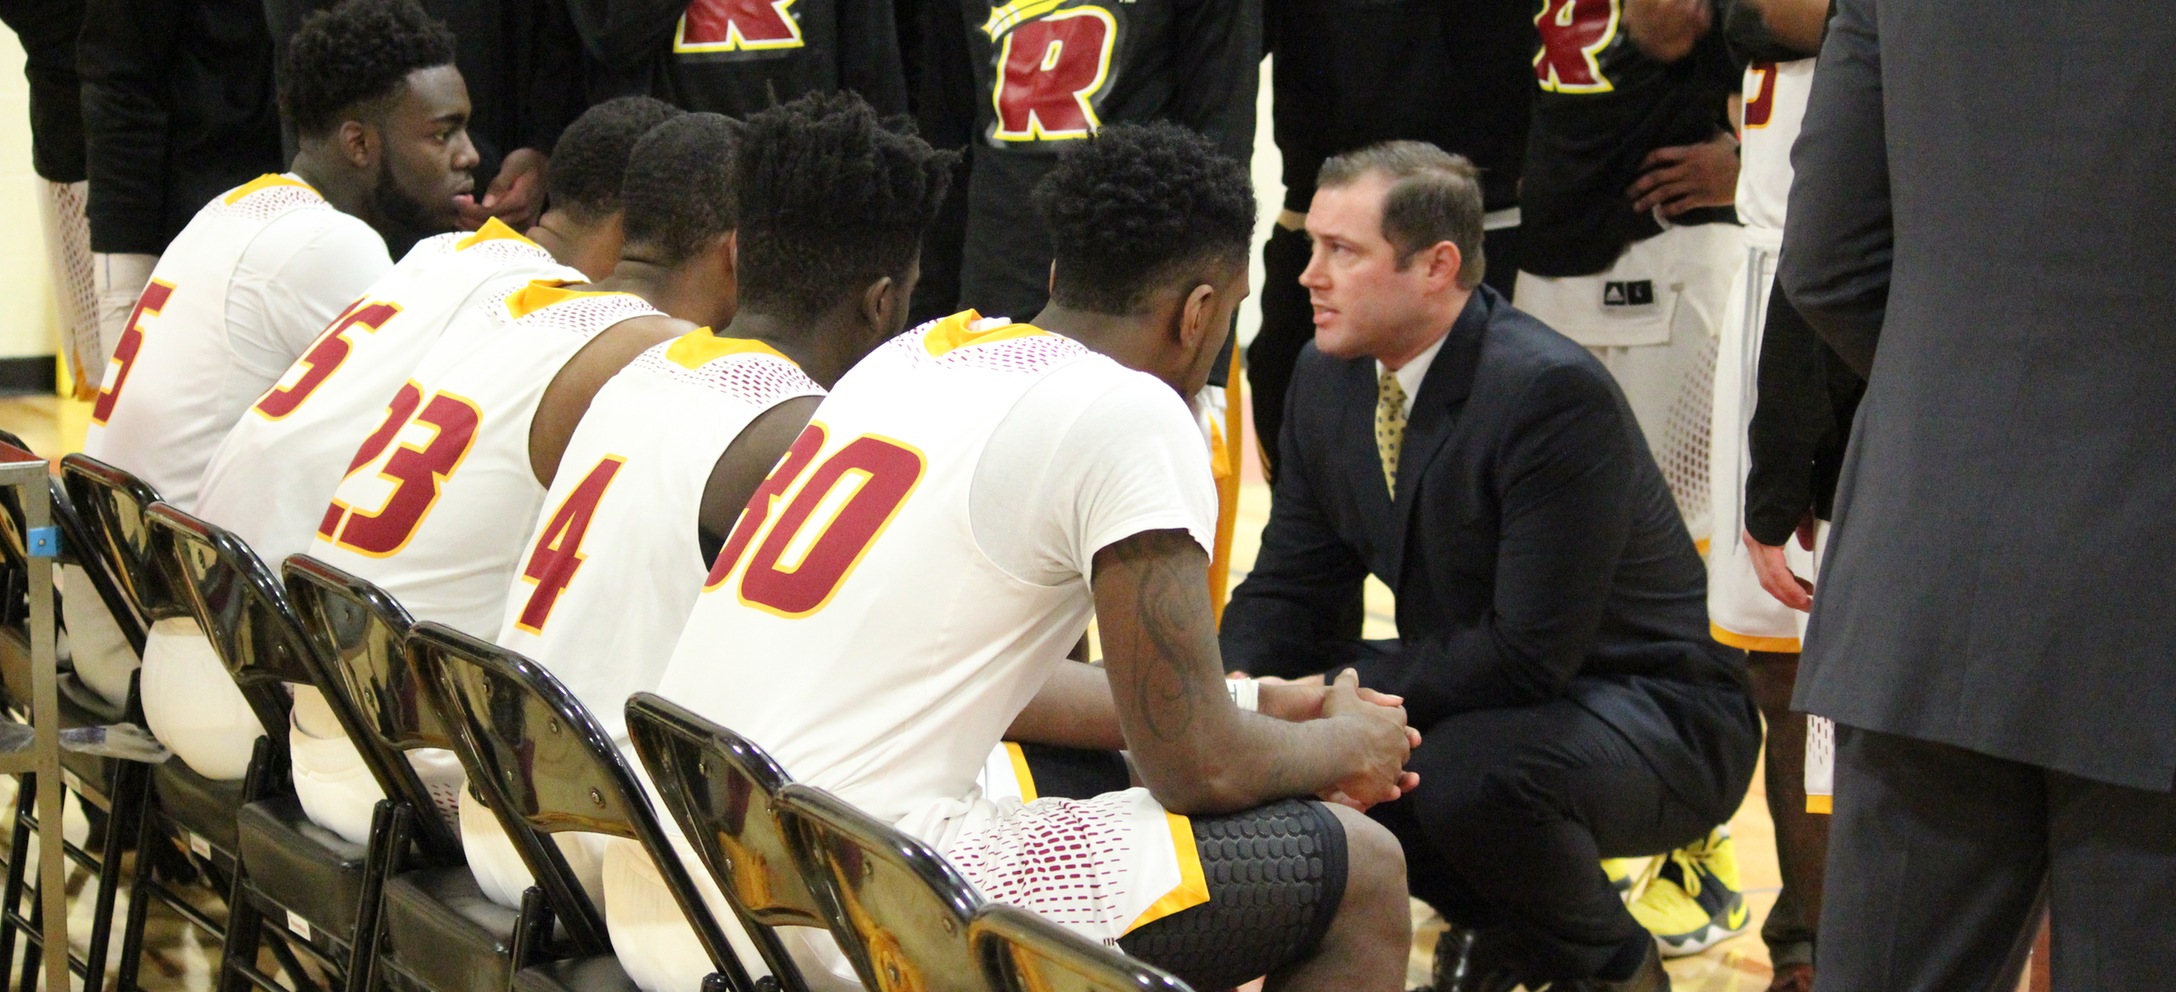 PREVIEW: Q & A With Men's Basketball Head Coach Nate Hager